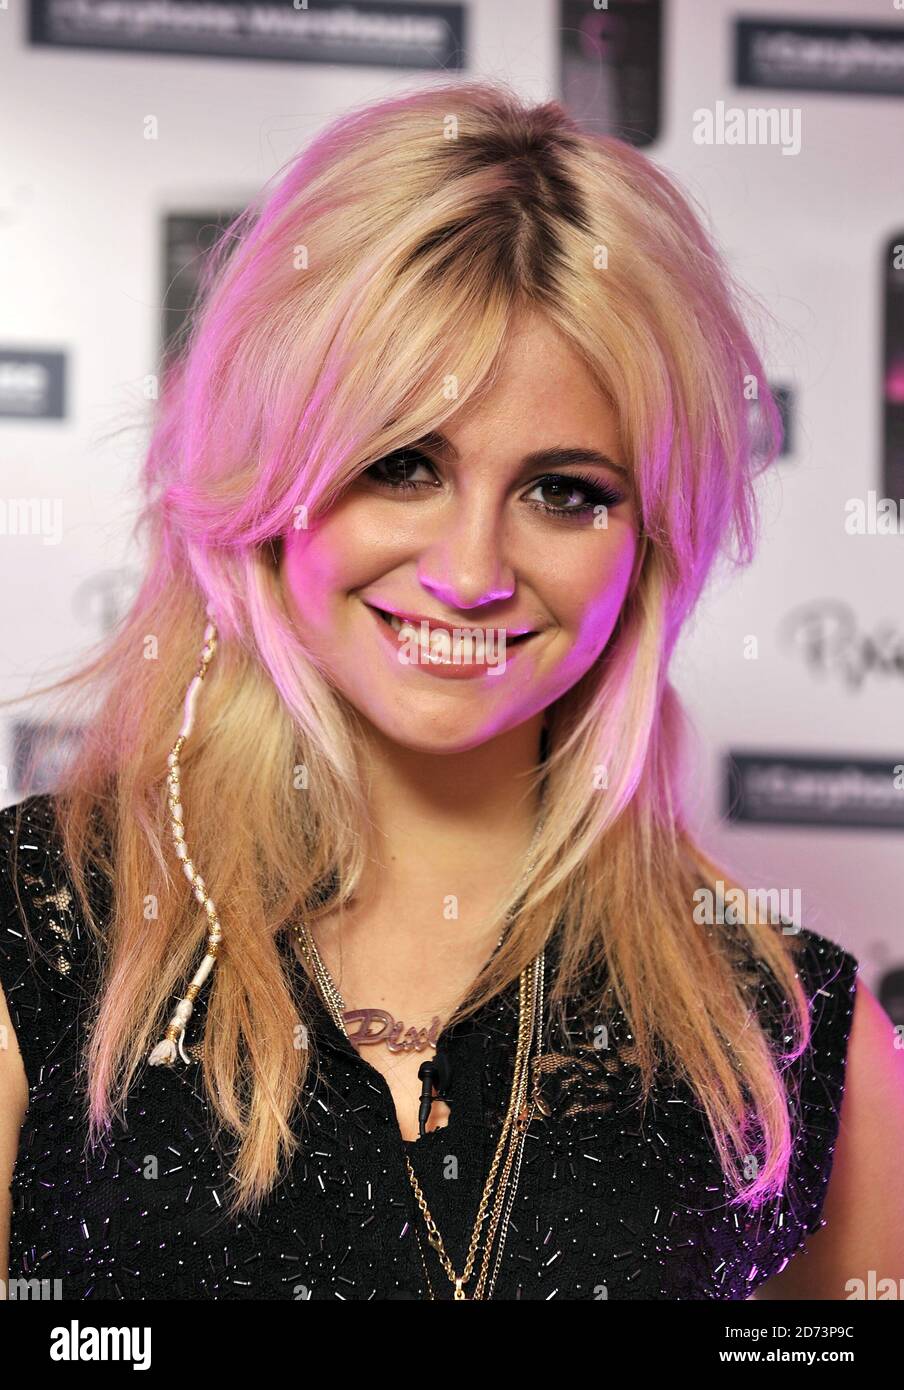 Pixie Lott poses for photographs at the Carphone Warehouse in Central London to mark the launch of the Illuvial Pink collection of handsets from Nokia. Stock Photo